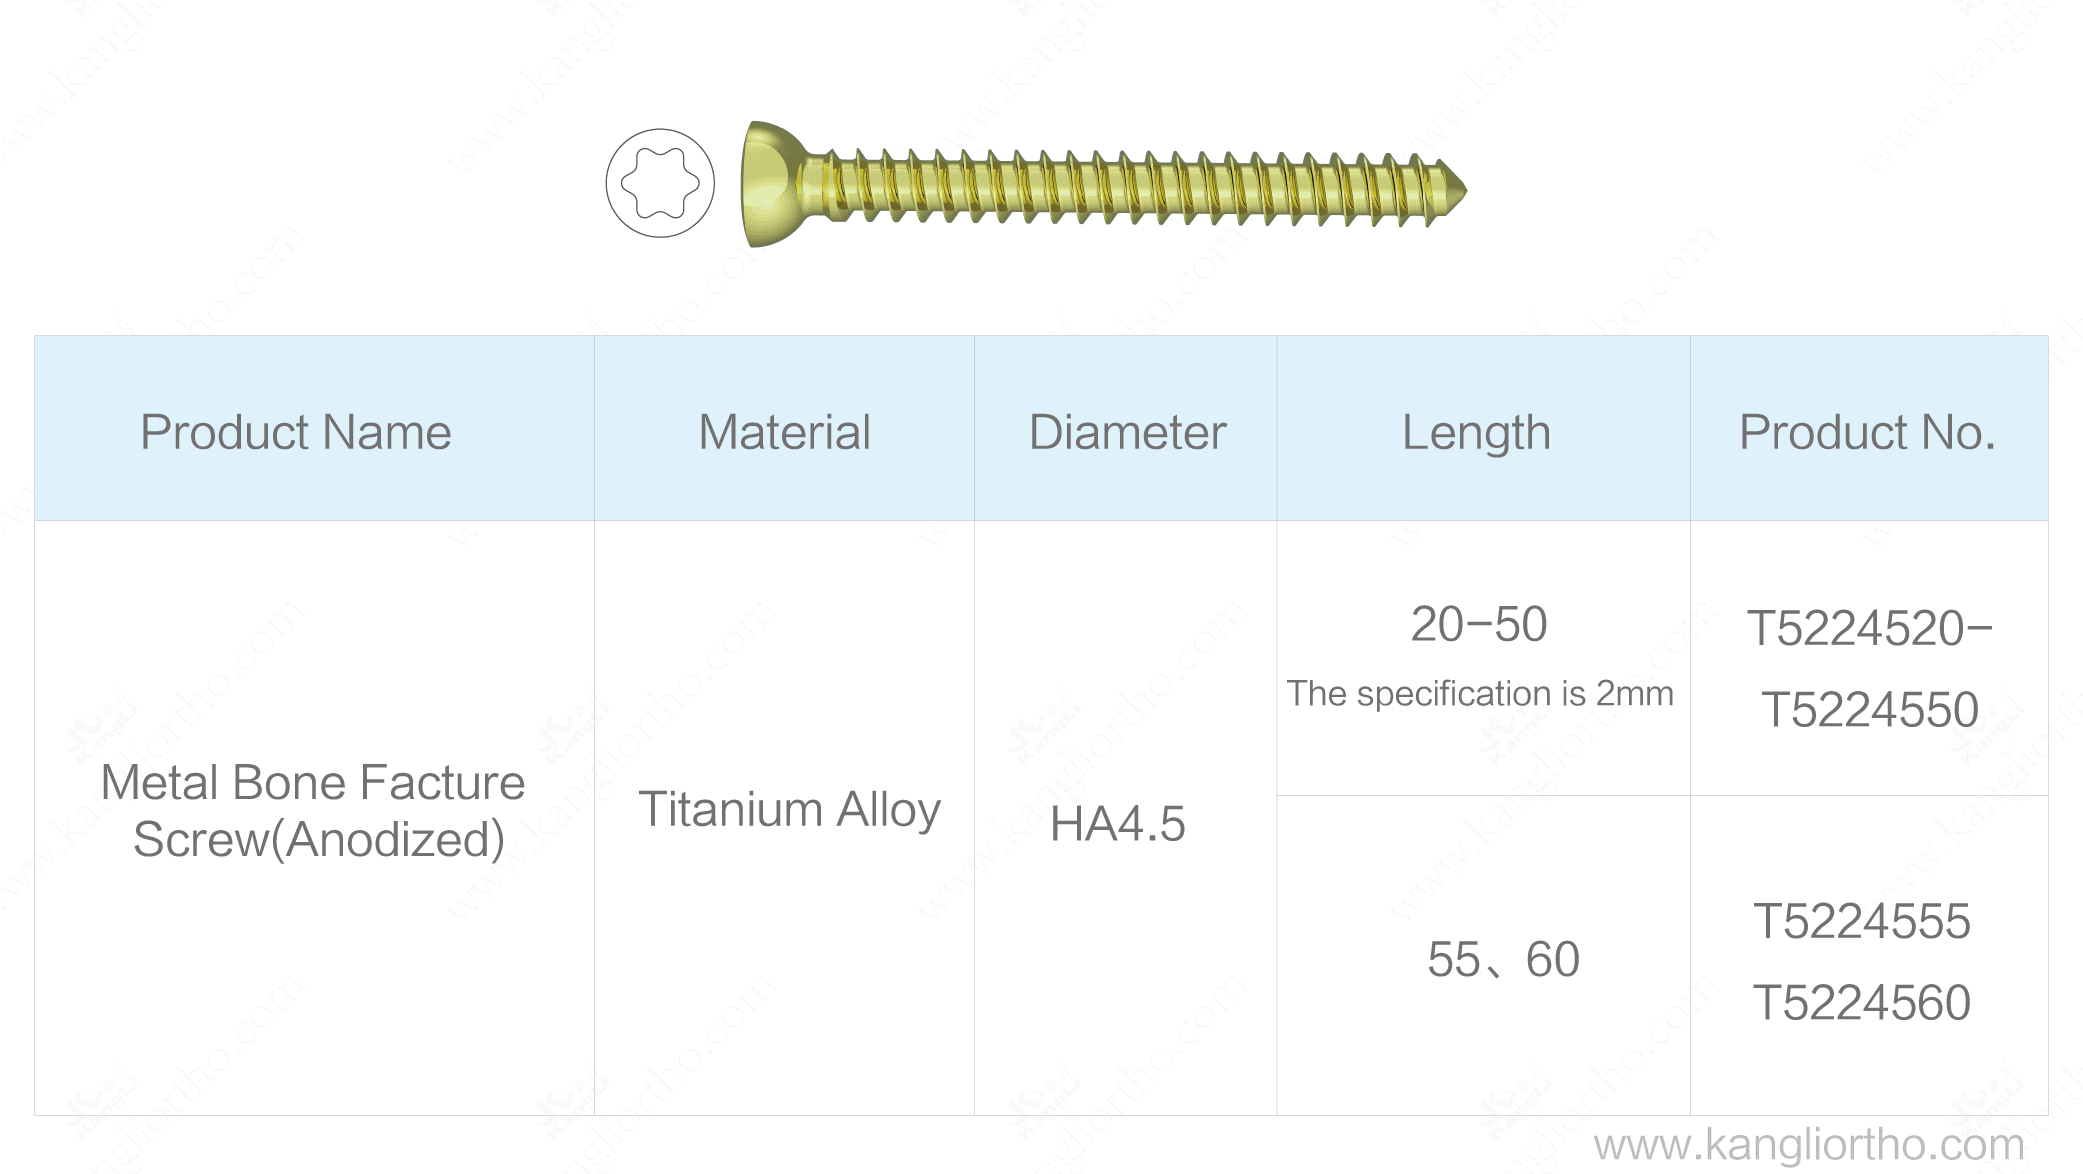 ha4-5-metal-bone-fracture-screw-anodized-specifications